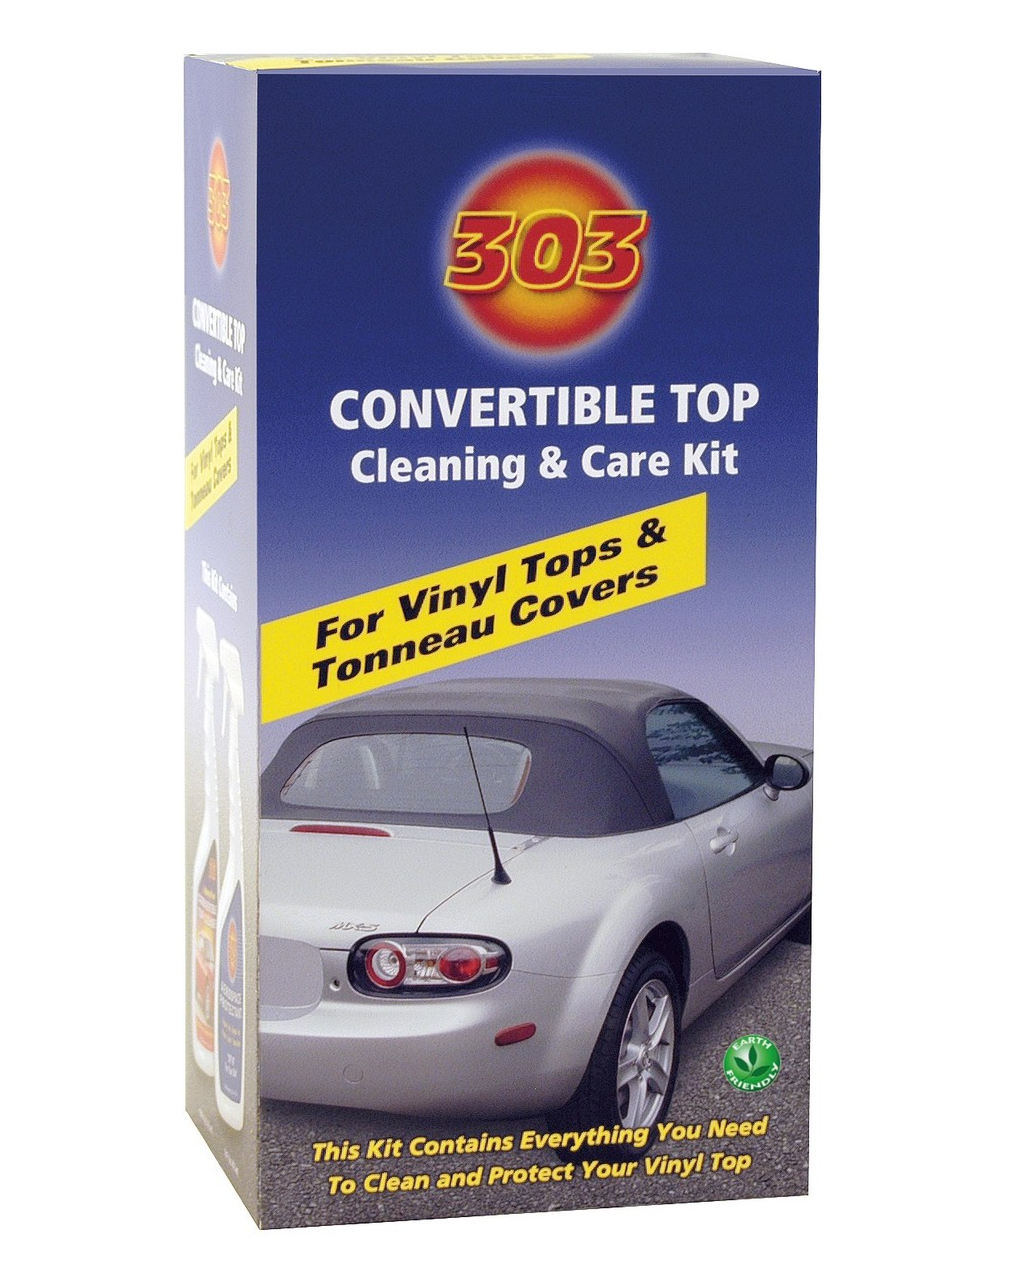 How To Clean and Protect a Convertible Top with 303 Convertible